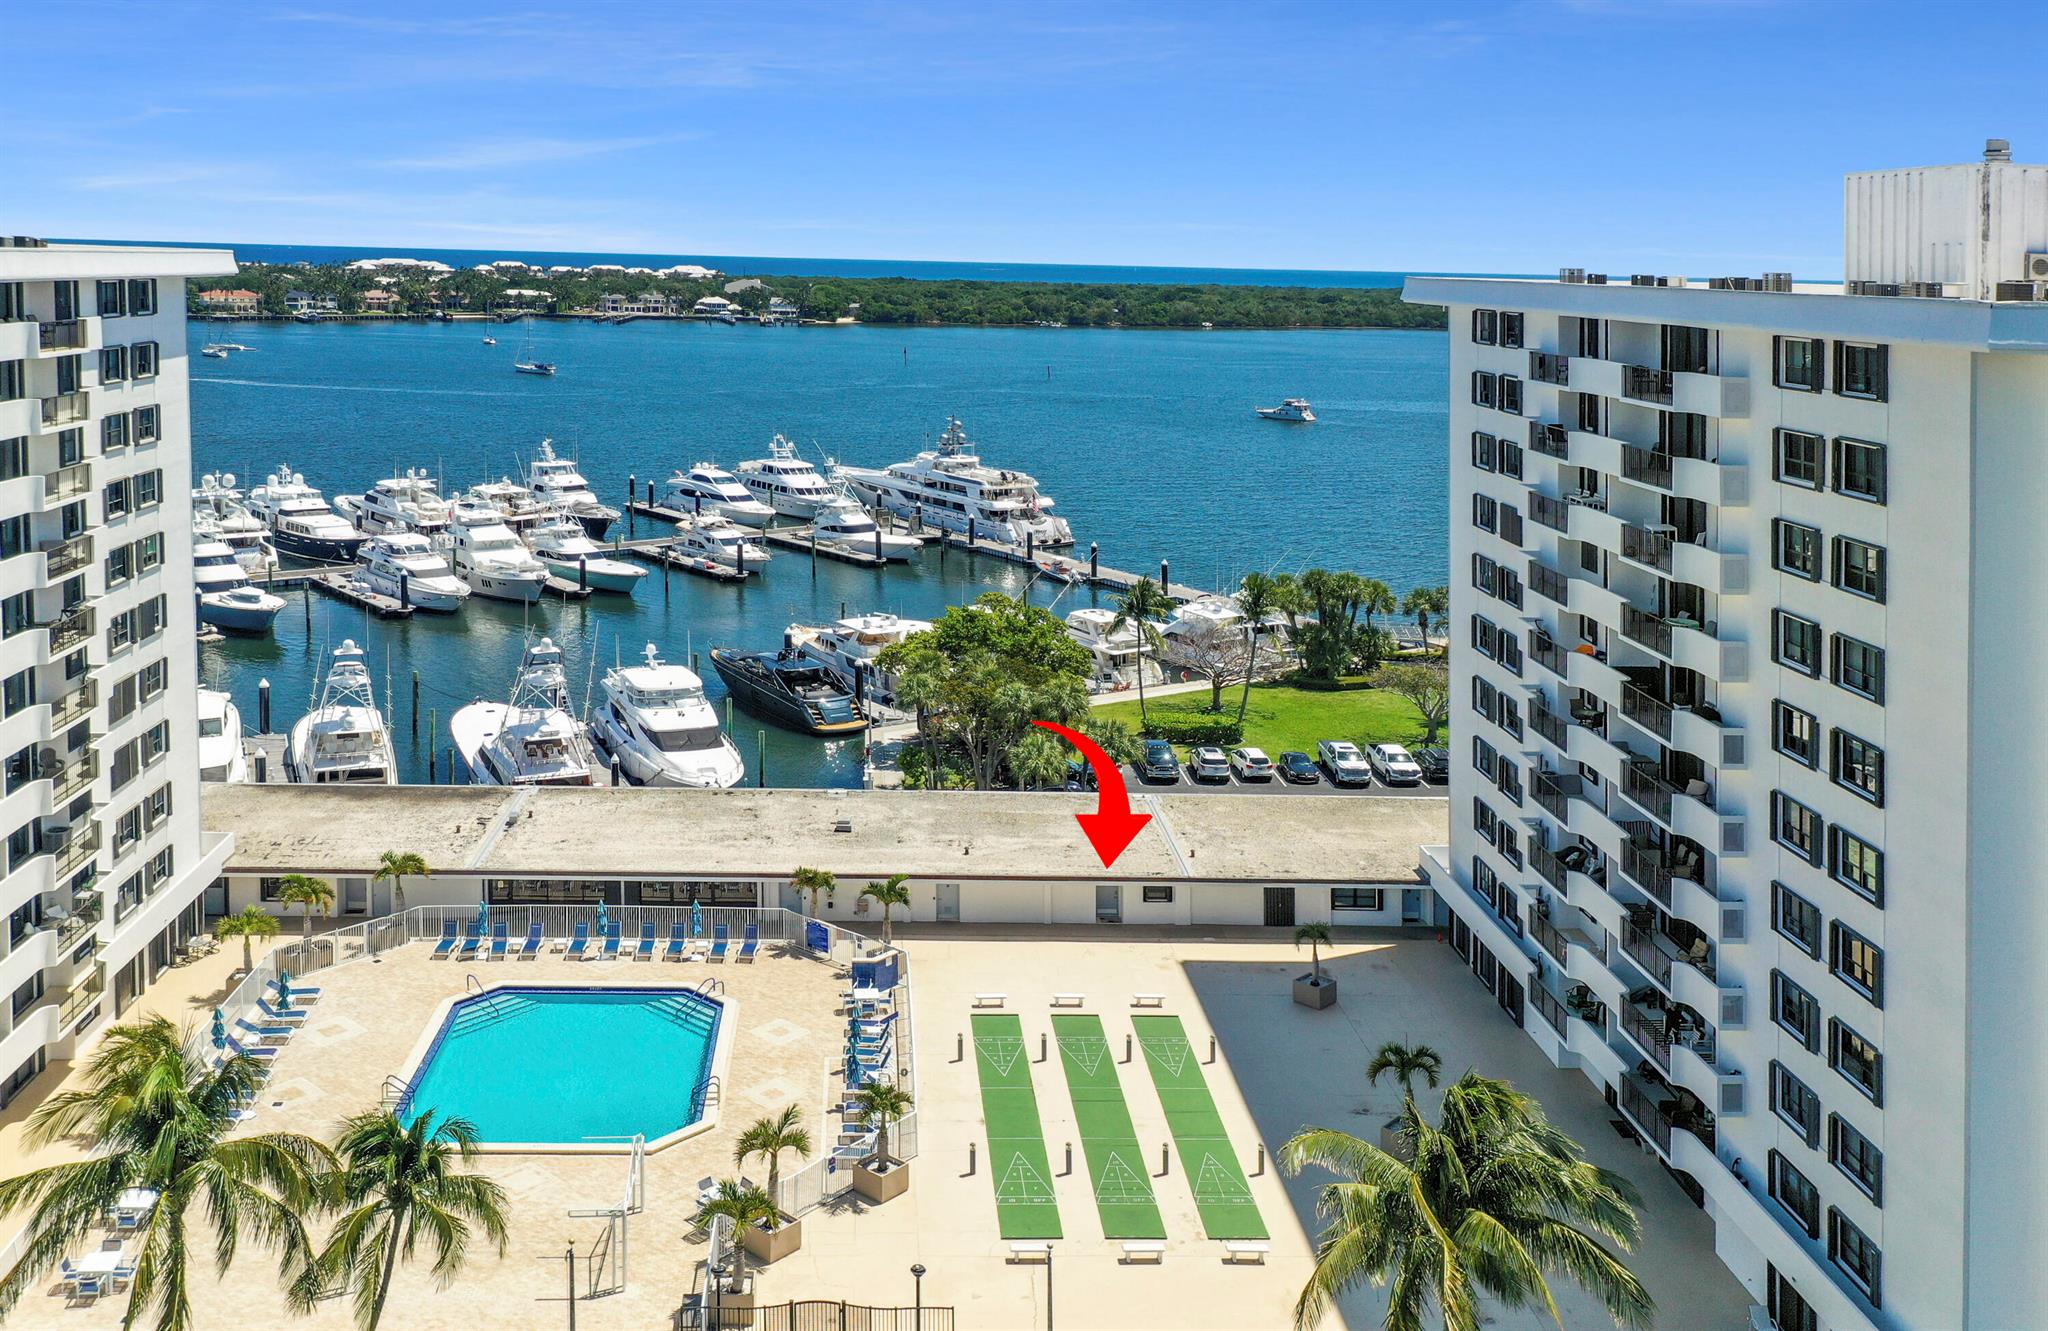 Priced For Quick Sale! It's all about the view & this marina view Garden Unit is marvelous!  This 1/1 in prestigious Old Port Cove is on the pool deck floor & has no one above or below making this unit unique in condo living. It is the closest to the heated pool, sauna & club room.  Unit features an oversized 240 Sq ft balcony with marina and intracoastal views, stainless steel appliances, granite counter tops, lots of storage including a walk in closet,  accordian hurricane shutters & new paint. Community also includes 24 hour manned gate, reading/game room, 2 mile walking path, tennis and community laundry. Fees include cable, internet, water, trash, sewer, manned gate.  Nearby pristine beaches, shopping, entertainment and 20 min to Palm Beach & PBI airport.